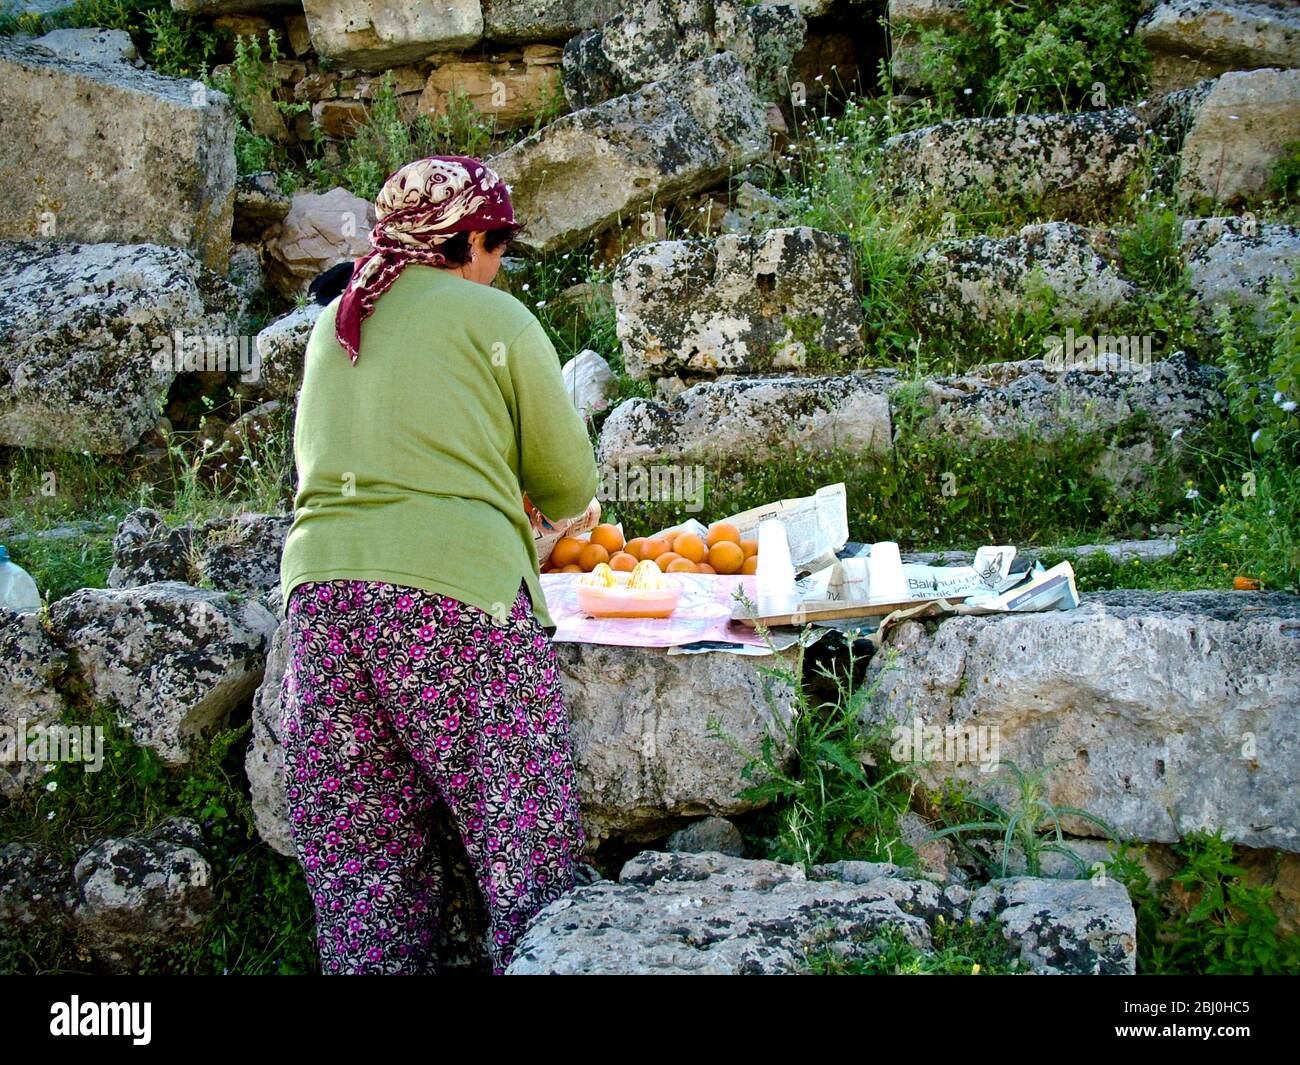 Woman squeezing oranges to sell glasses of fresh juice to tourists at ancient Greek amphitheatre, southern Turkey - Stock Photo